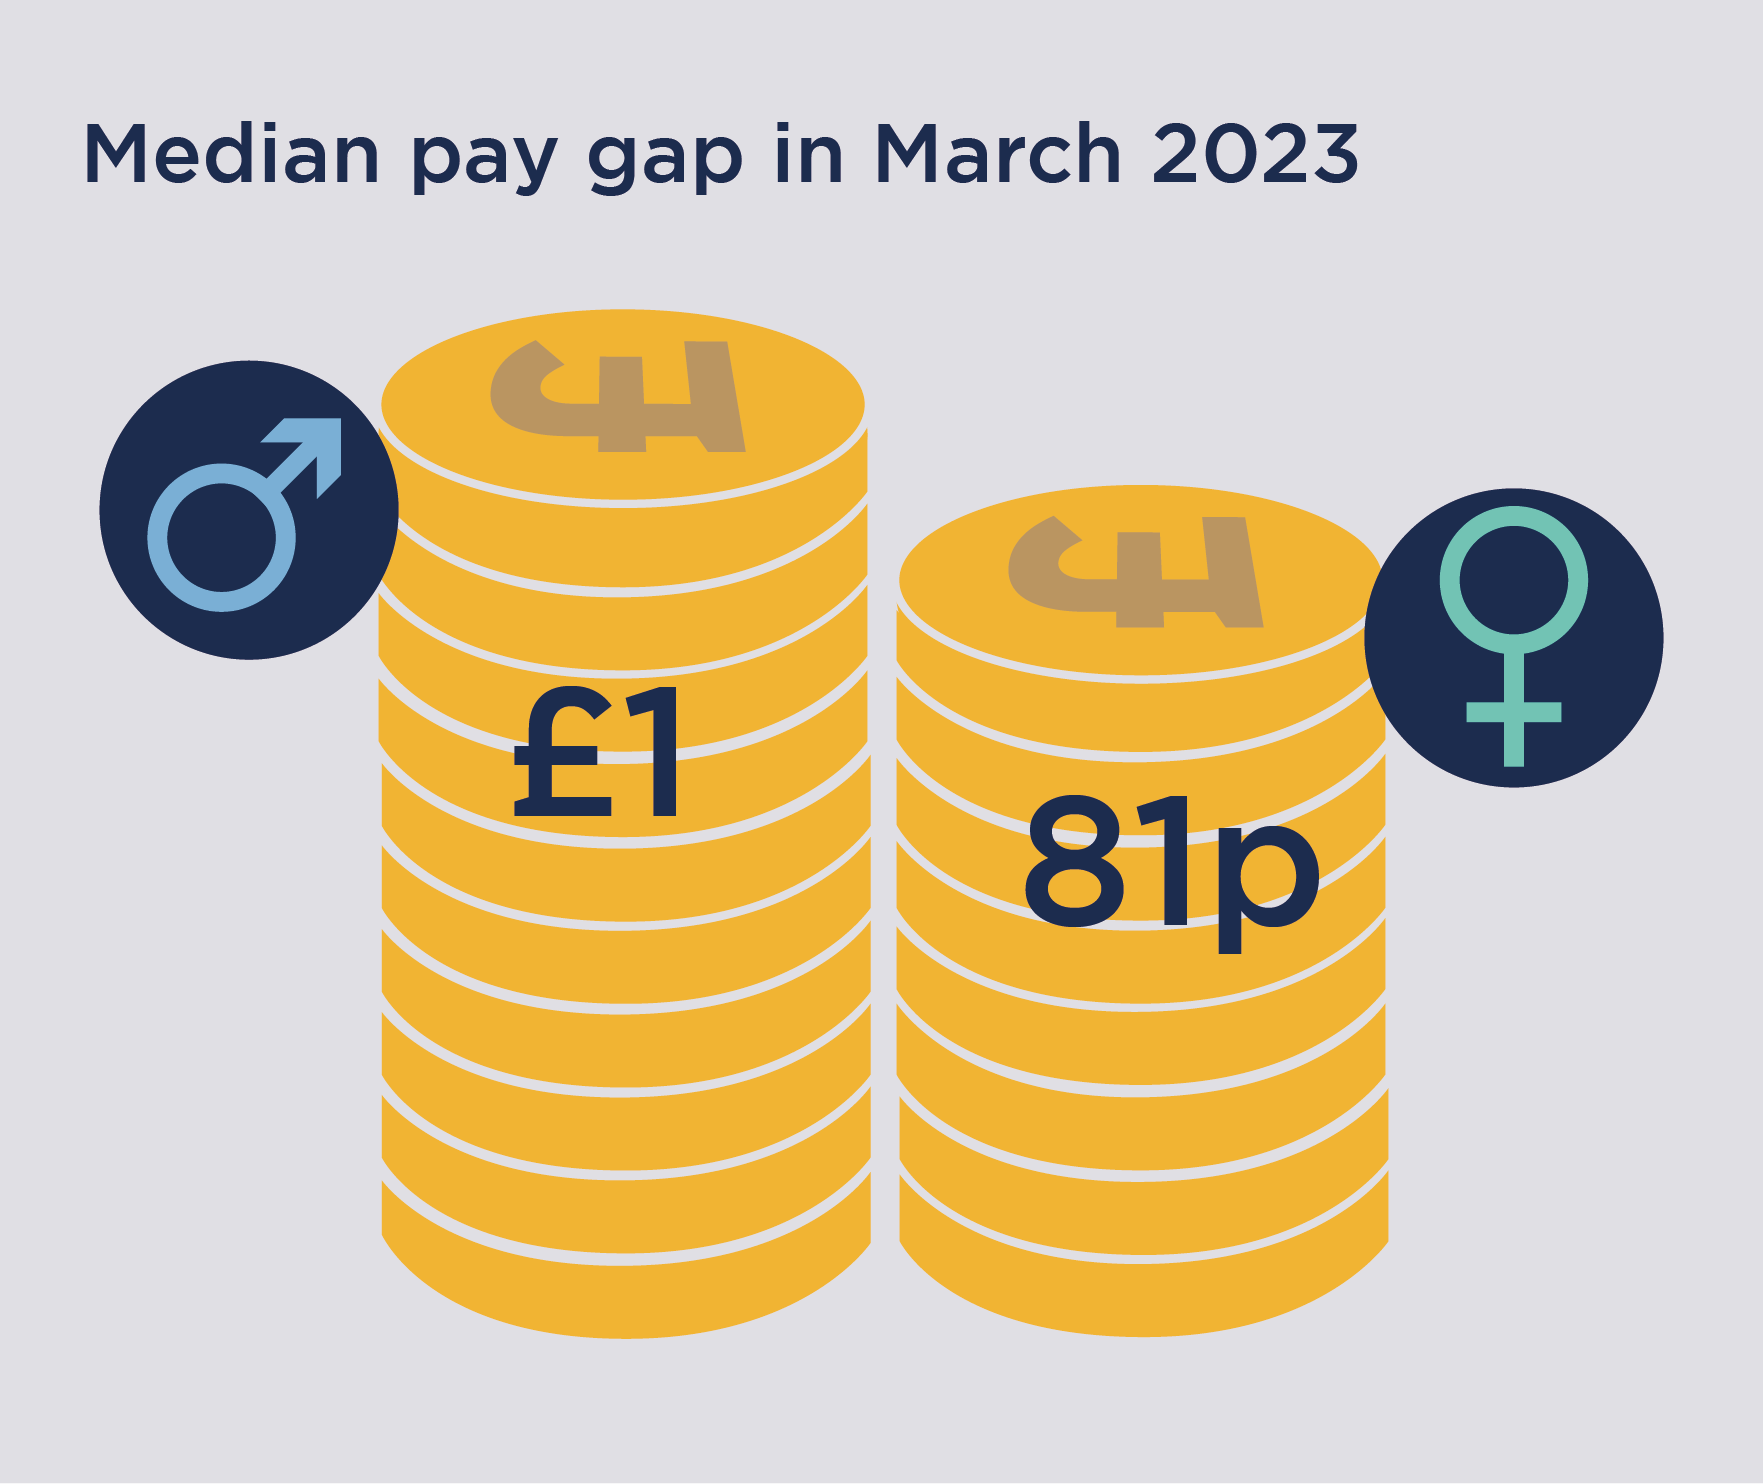 Bar chart showing median pay in March 2023 of 81 pence in the pound.